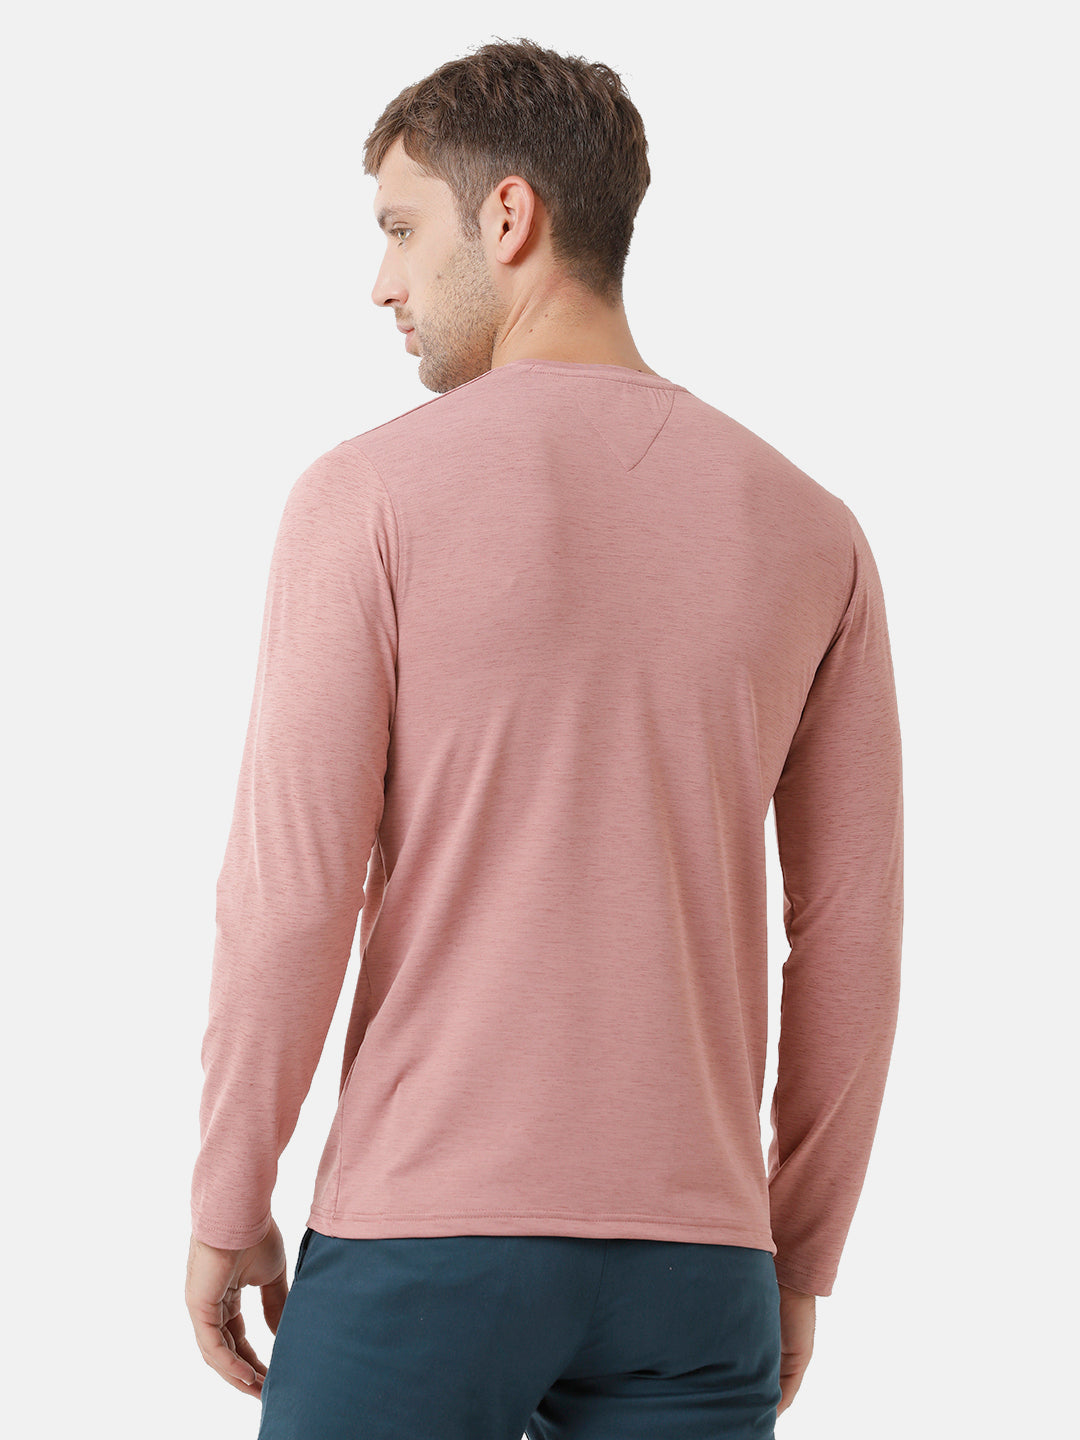 Classic Polo Mens Cotton Solid Full Sleeve Slim Fit Y Neck Peach Color T-Shirt | Verno 308 B